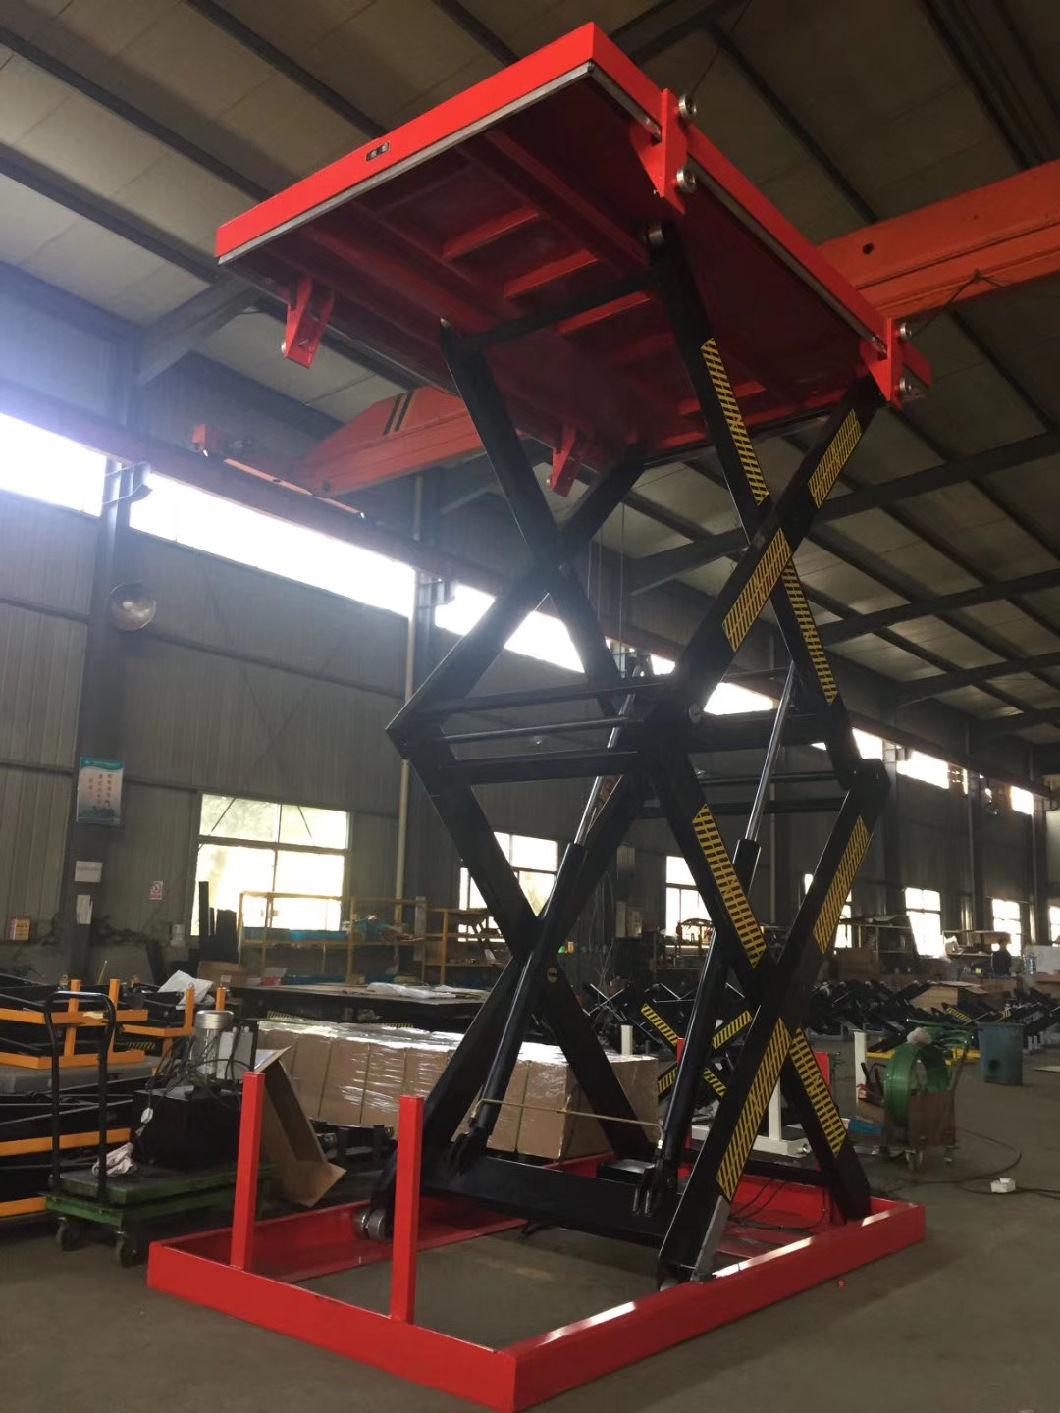 Two Scissor Electric Manual Movable Industrial Lift Table